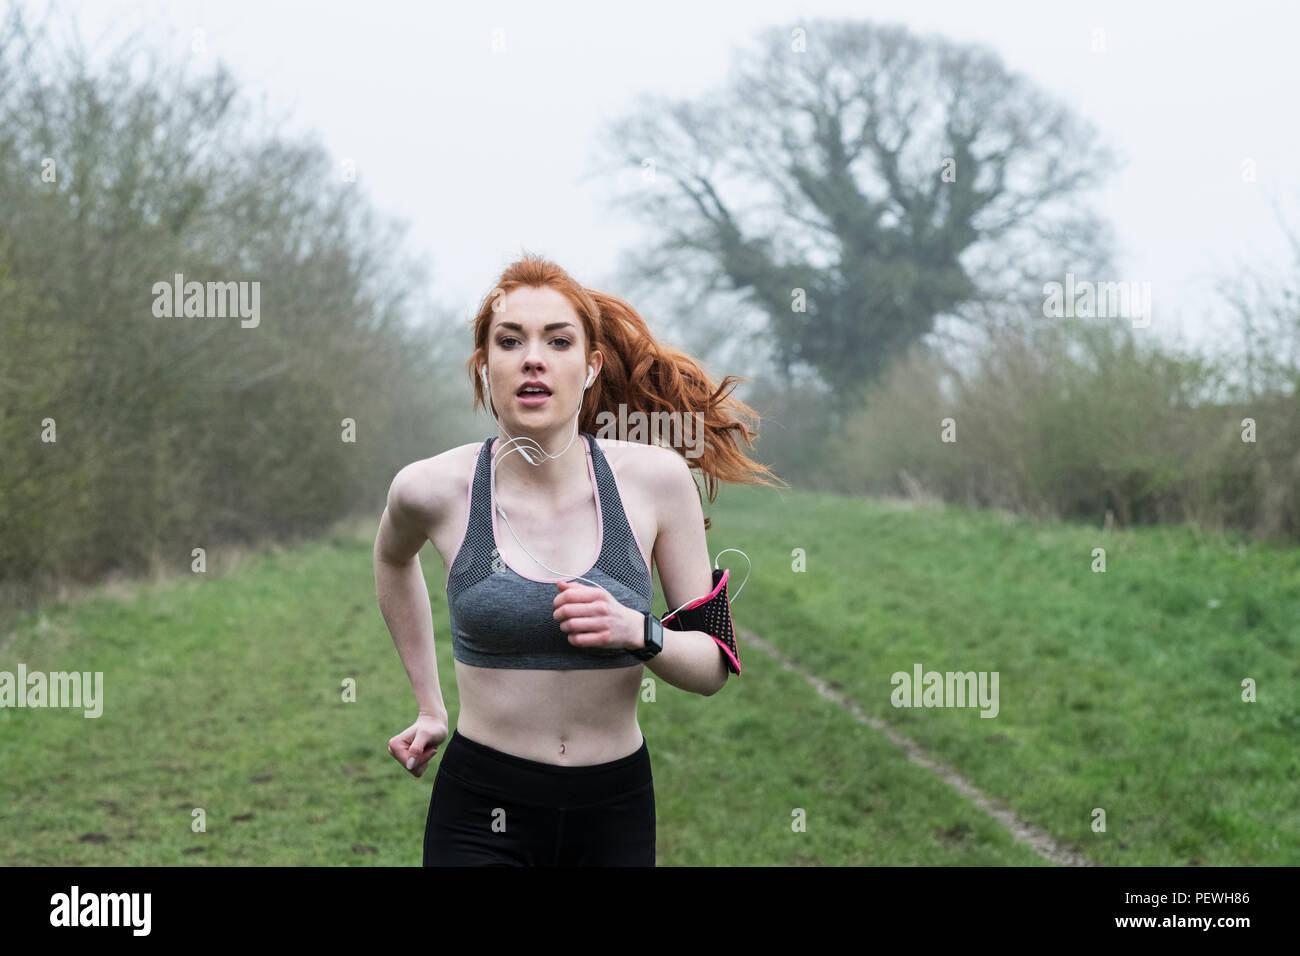 Young woman with long red hair wearing sportswear and earphones, exercising outdoors, running along, armband with music player, looking at camera. Stock Photo